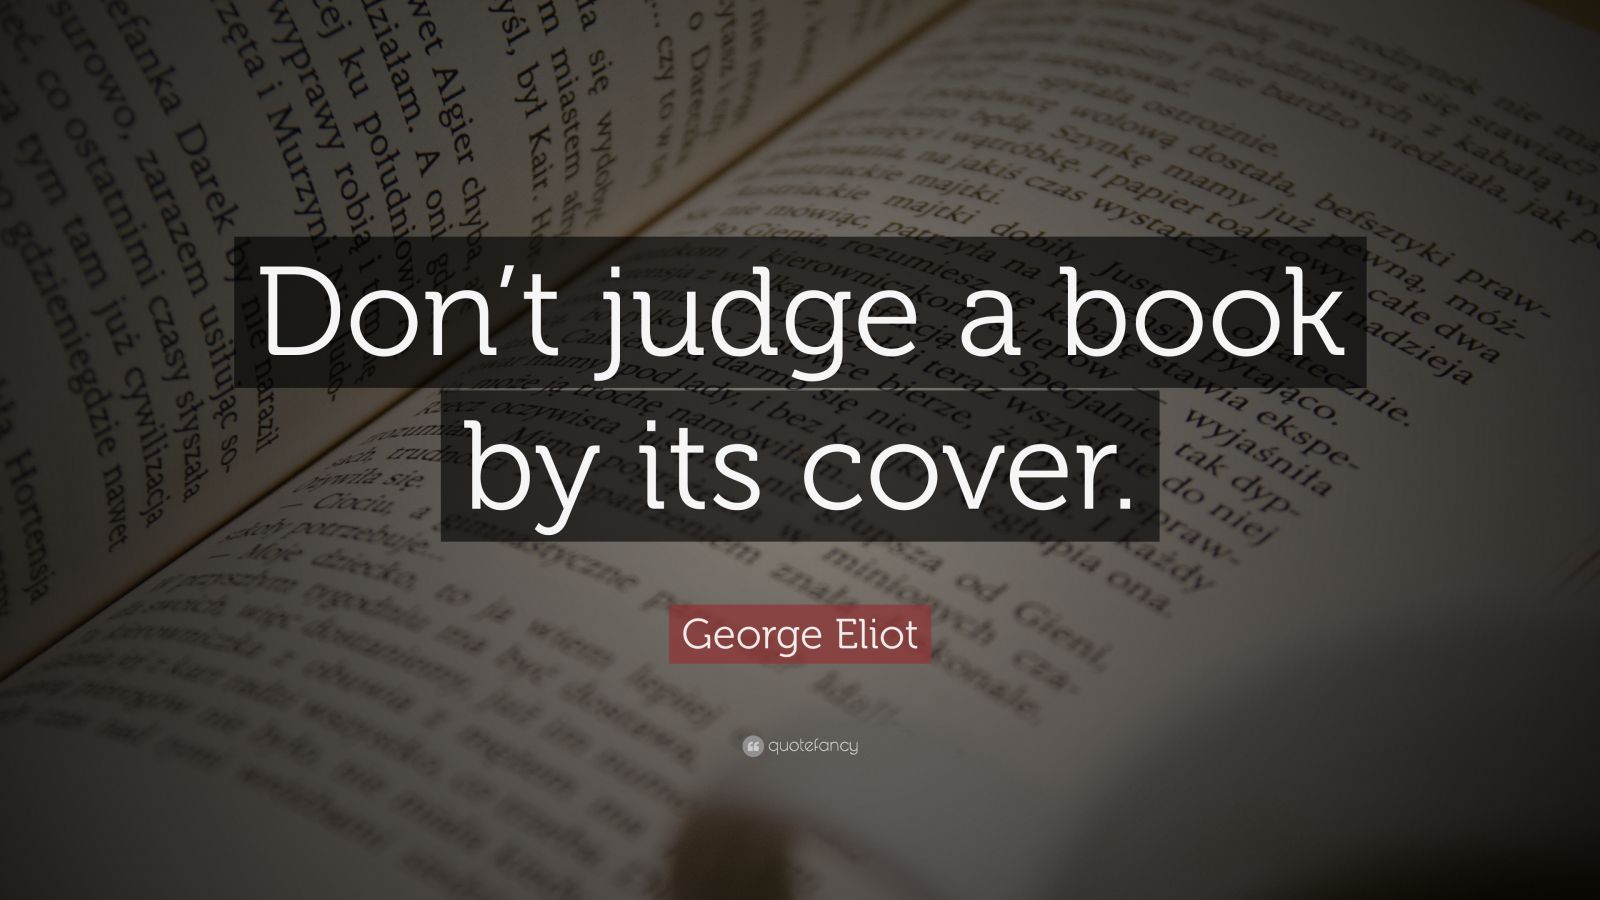 assignment don't judge a book by its cover